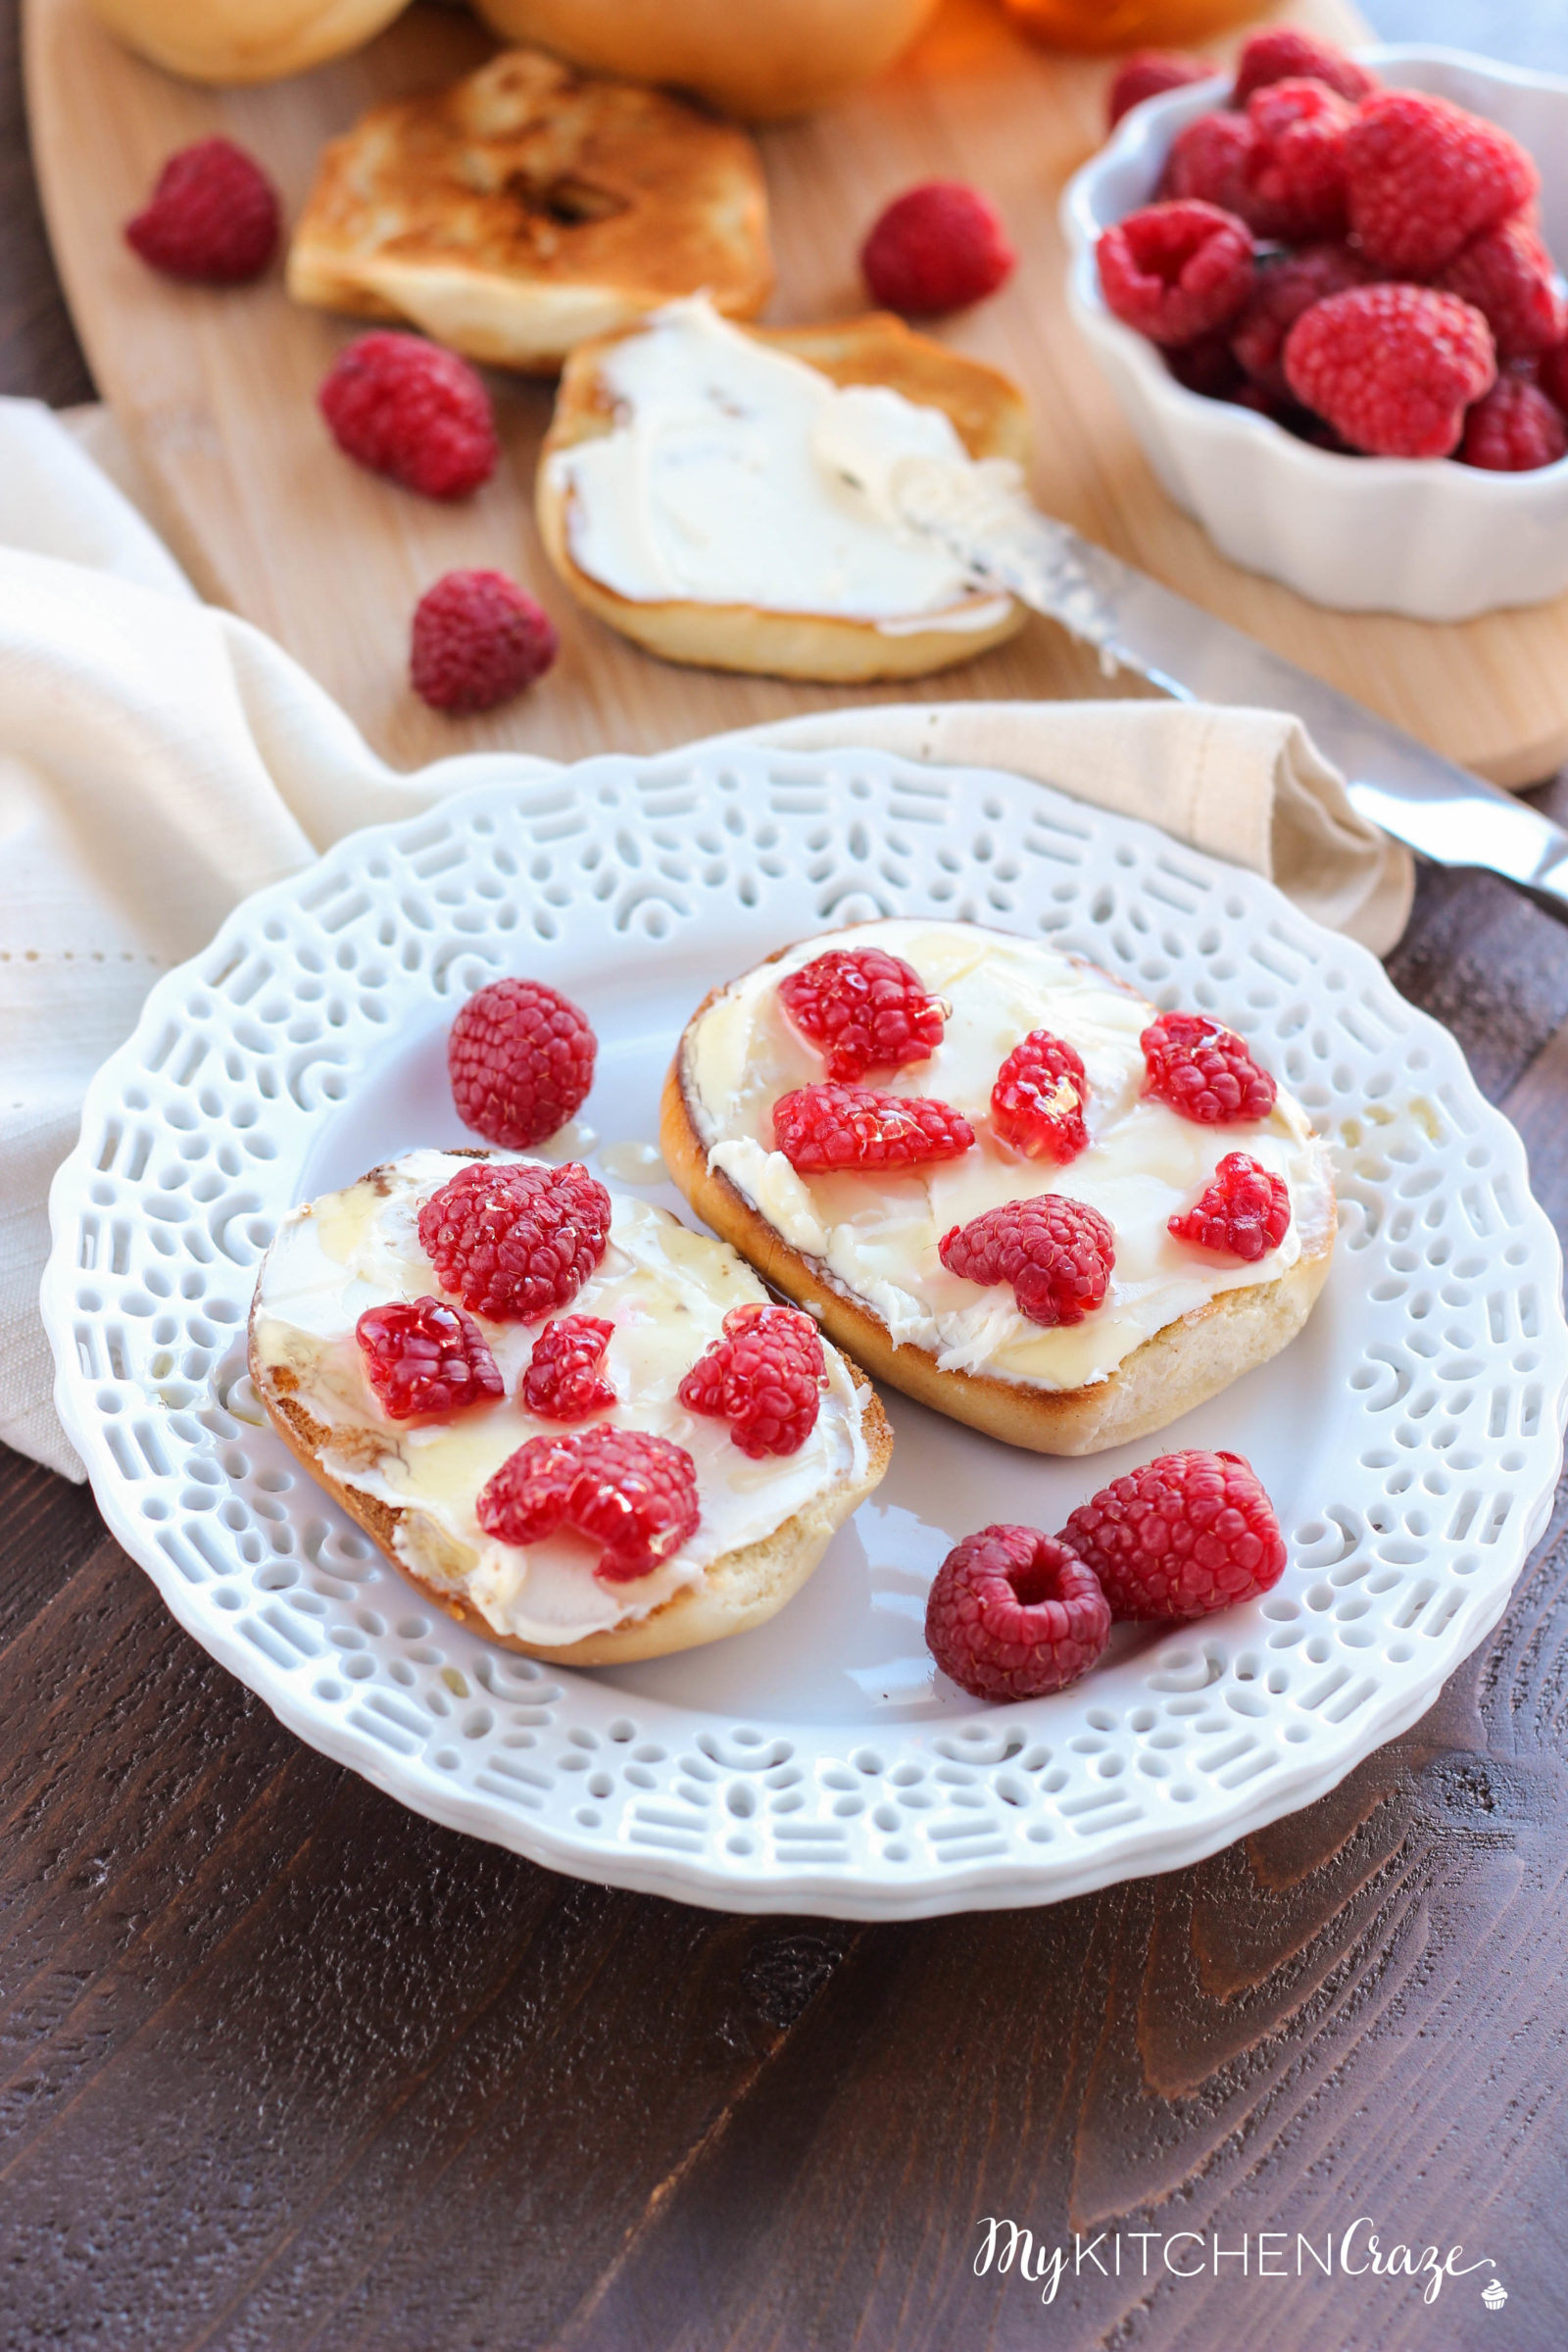 Honey Raspberry Bagels ~ mykitchencraze.com ~ Enjoy these easy 4 ingredient bagels for a quick breakfast or dessert. Loaded with mascarpone cheese, raspberries and honey. These bagels will be gone before you know it.